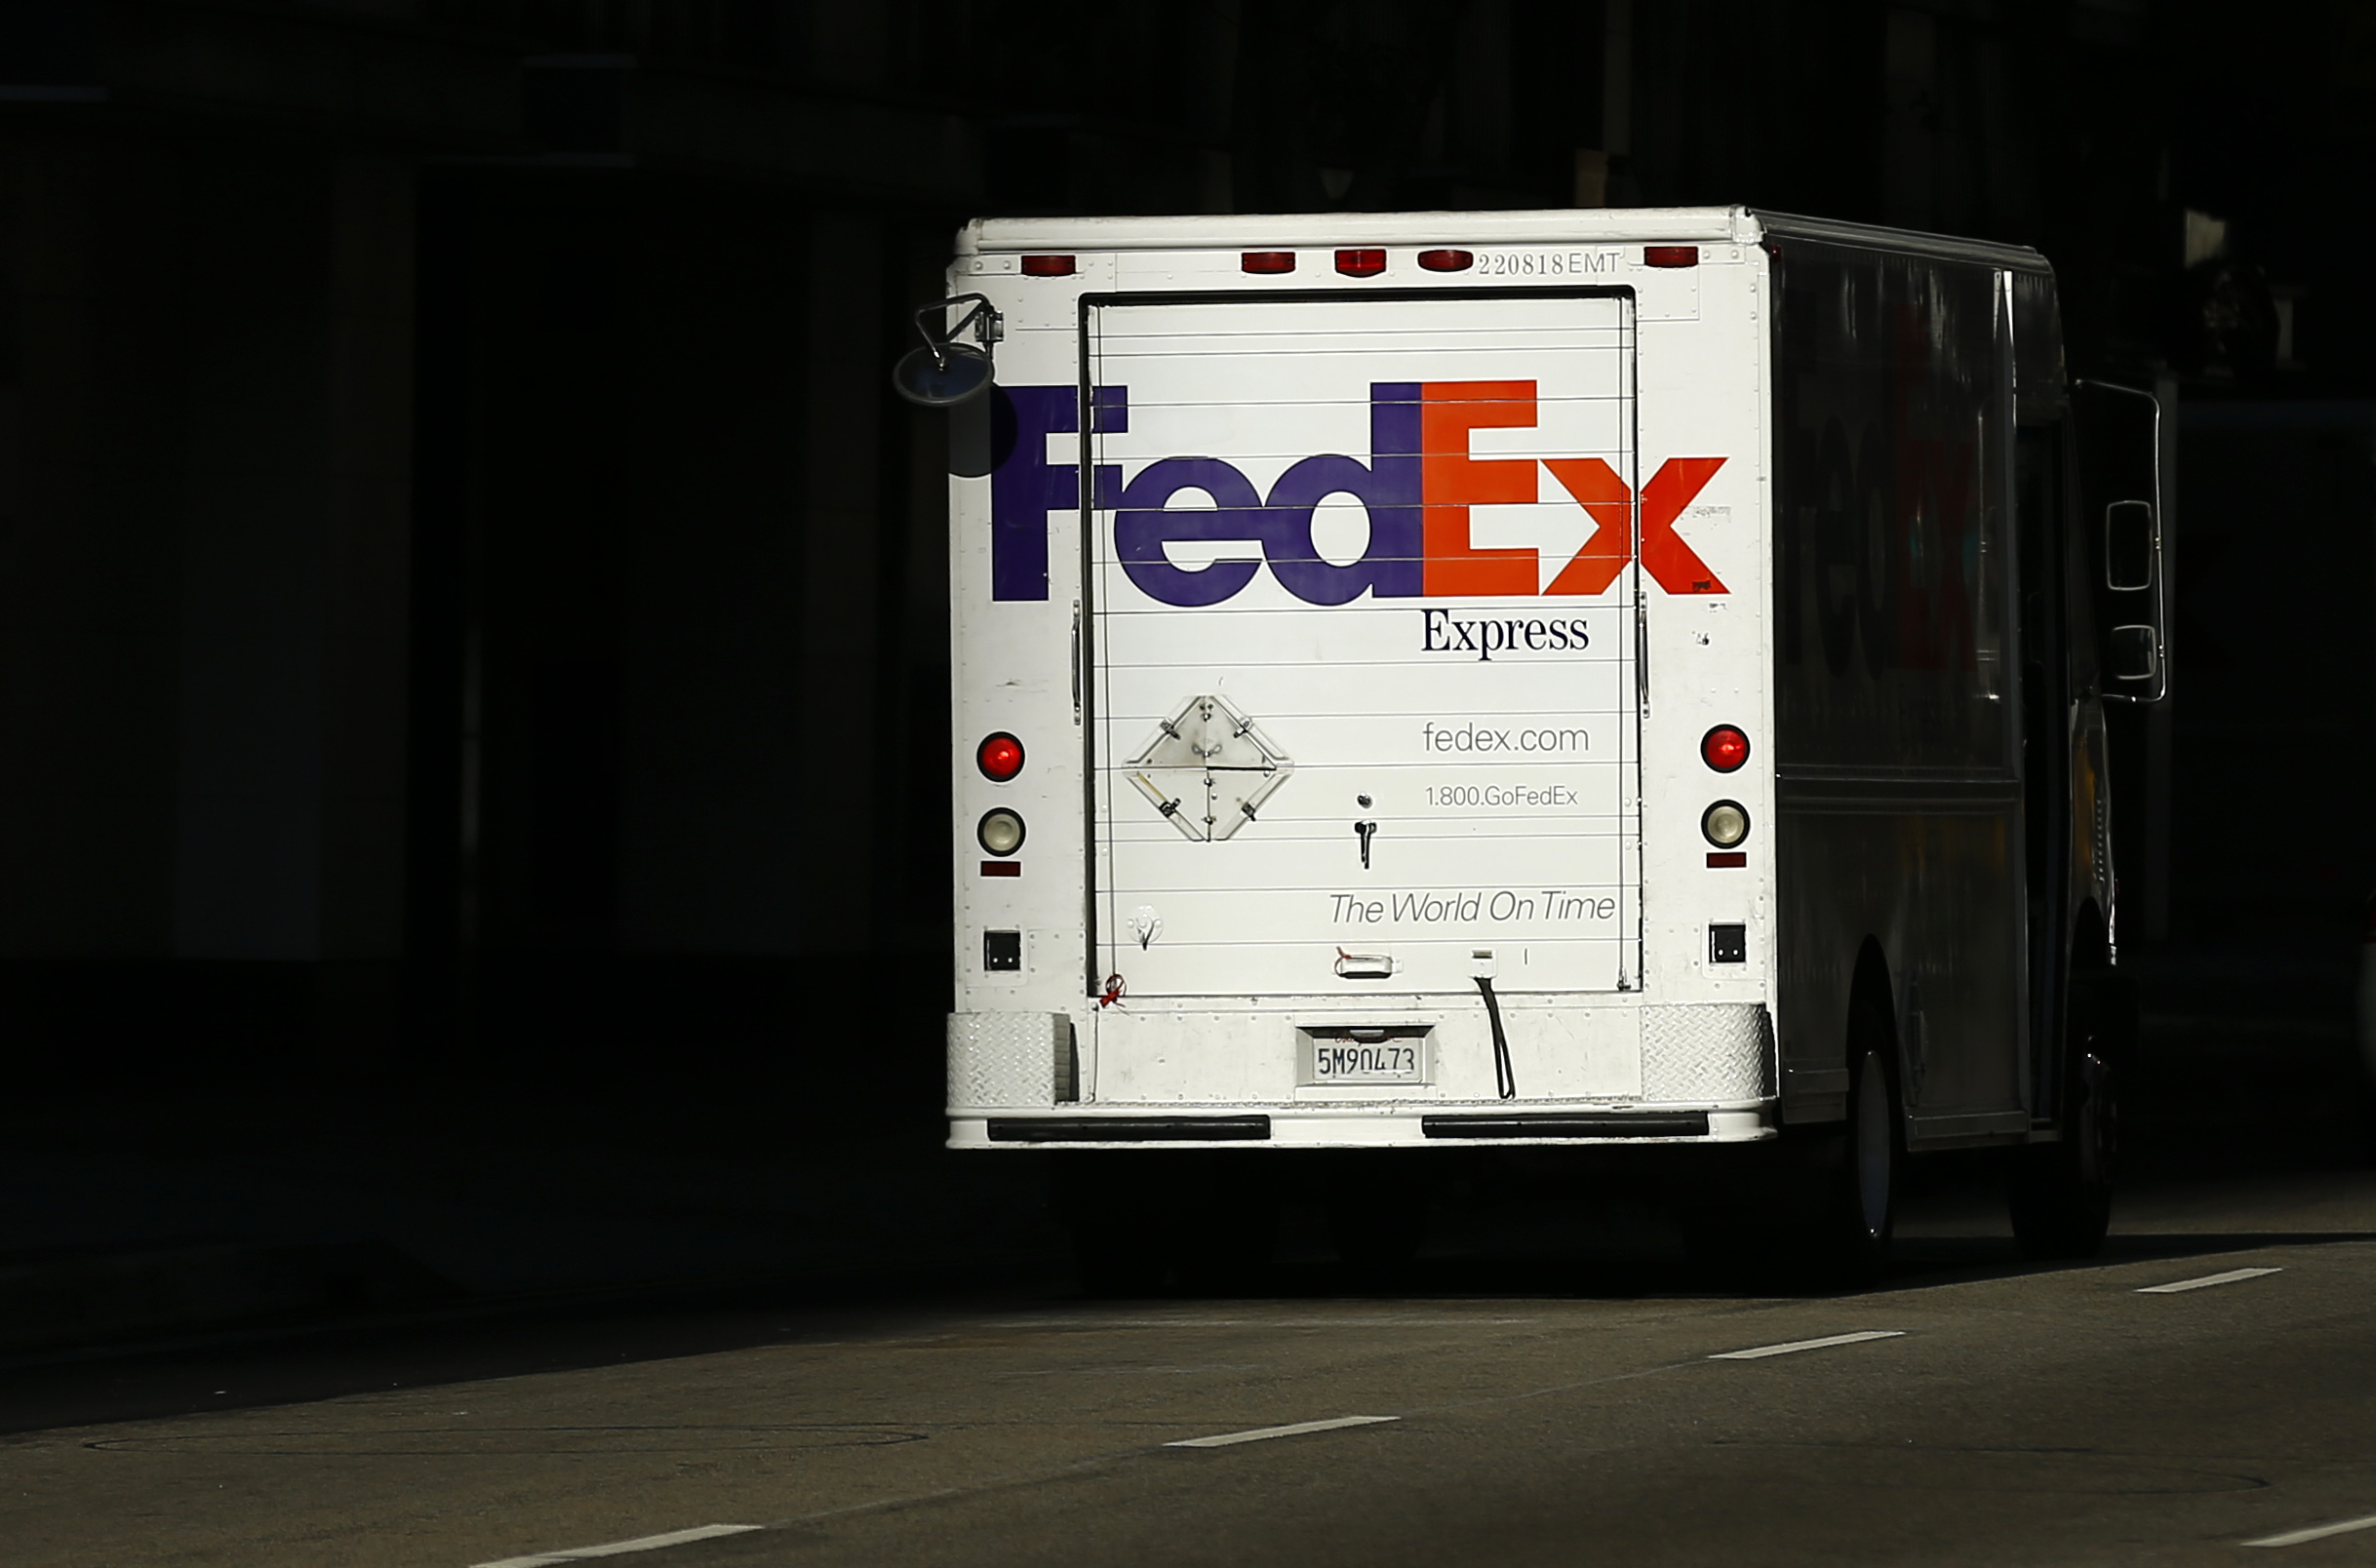 A Federal Express truck on delivery is pictured in downtown Los Angeles